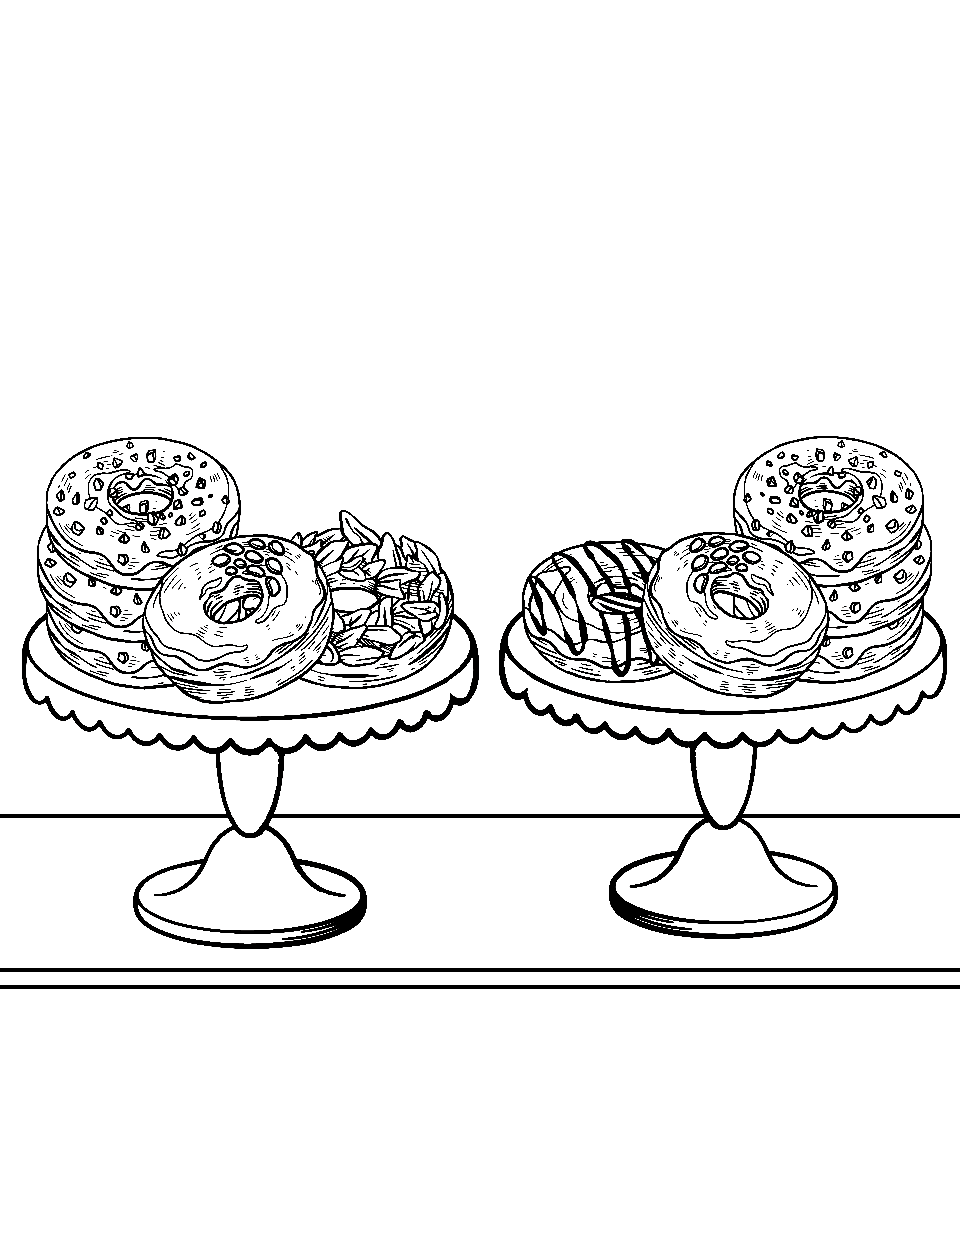 Fancy Donut Shop Display Coloring Page - A display of a donut shop filled with fancy donuts.